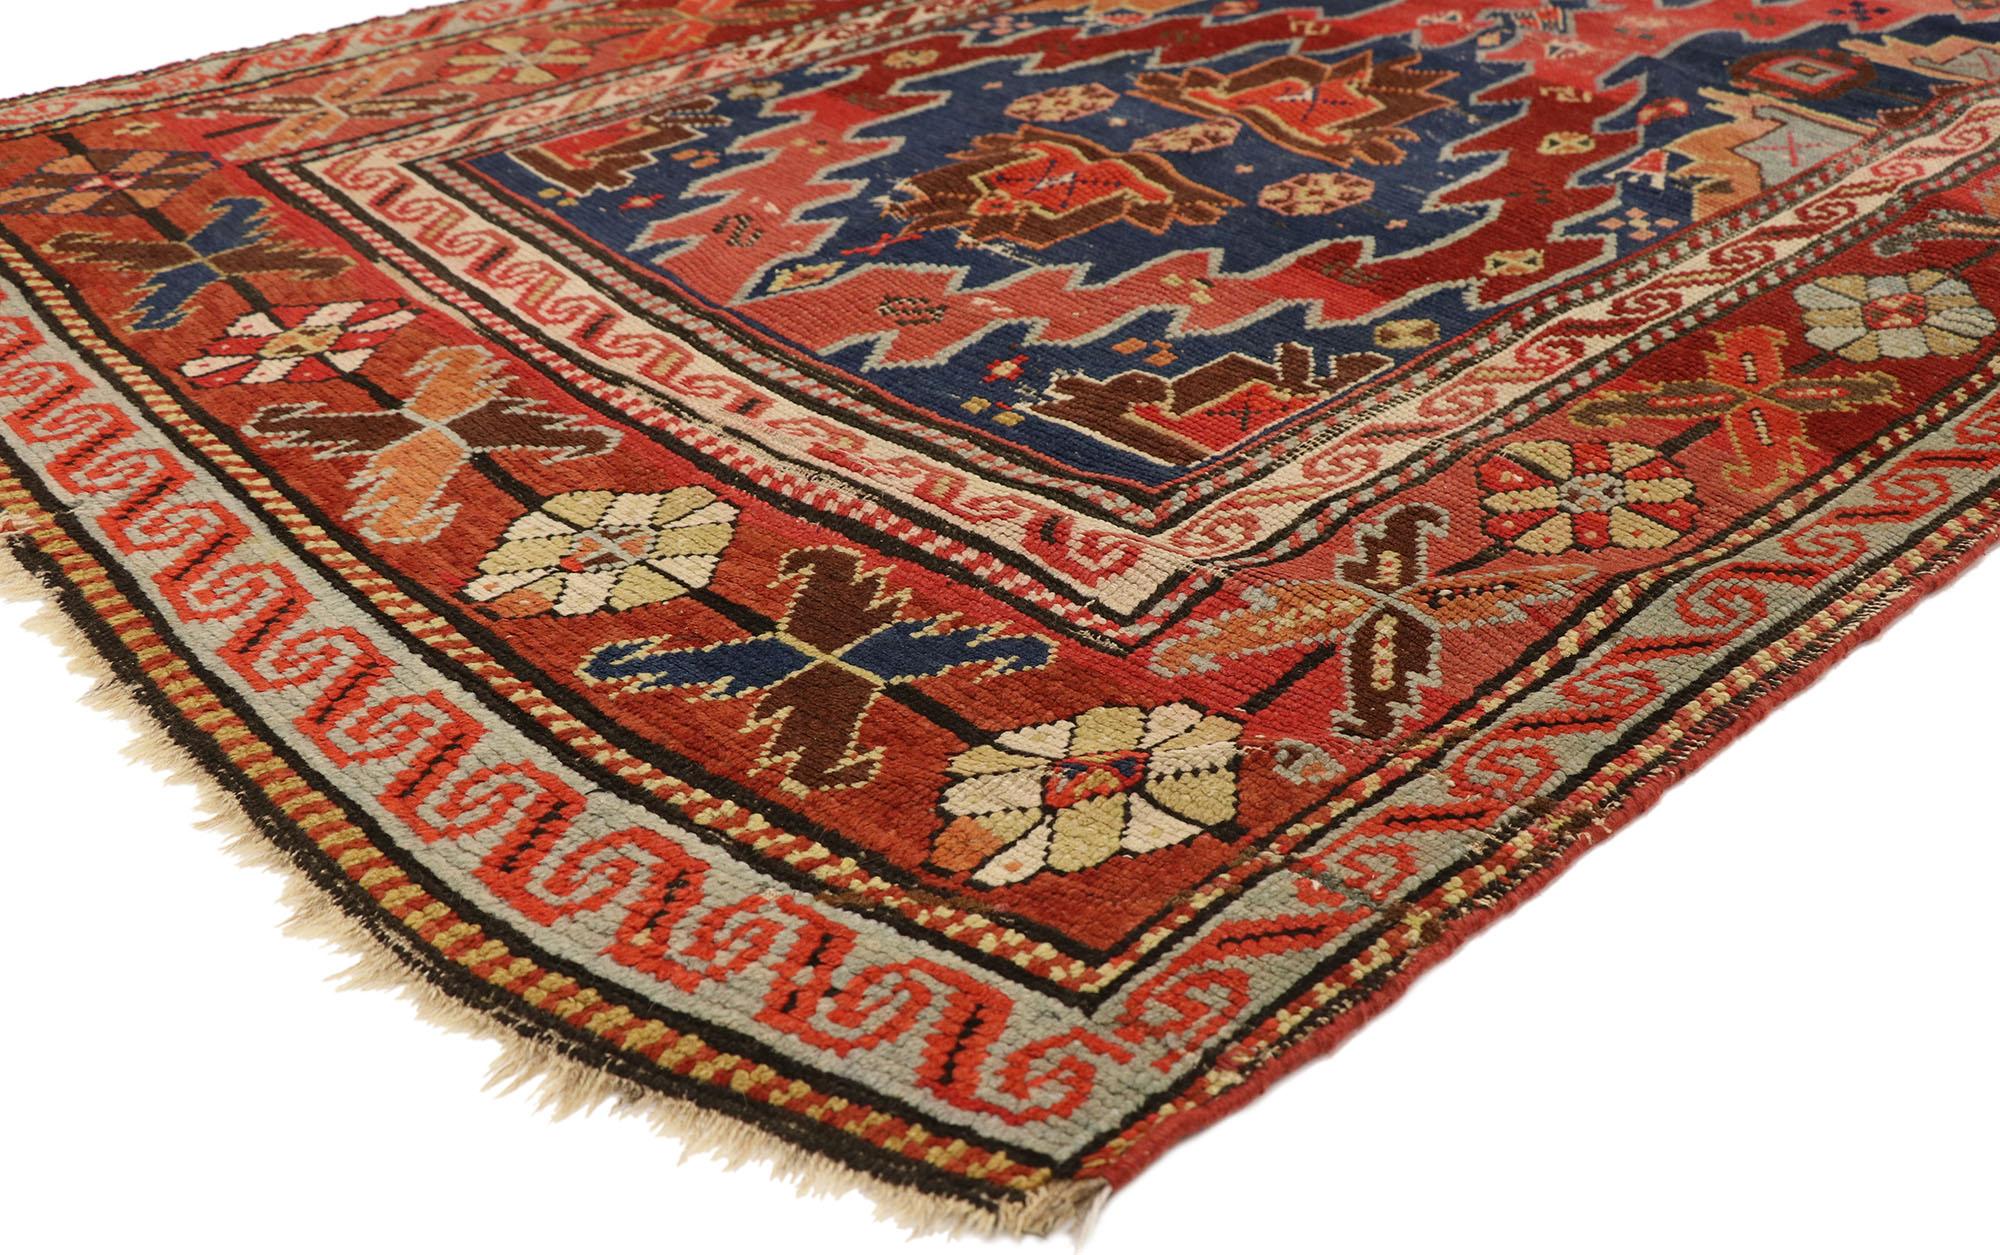 73080 Antique Caucasian Kazak Rug, 04’00 x 08’00.
Bold and rustic, this hand-knotted wool antique Caucasian Kazak rug features a robust composition. Two jagged edge lozenge medallions connect at one end and fill the Kazak rug field in brilliant